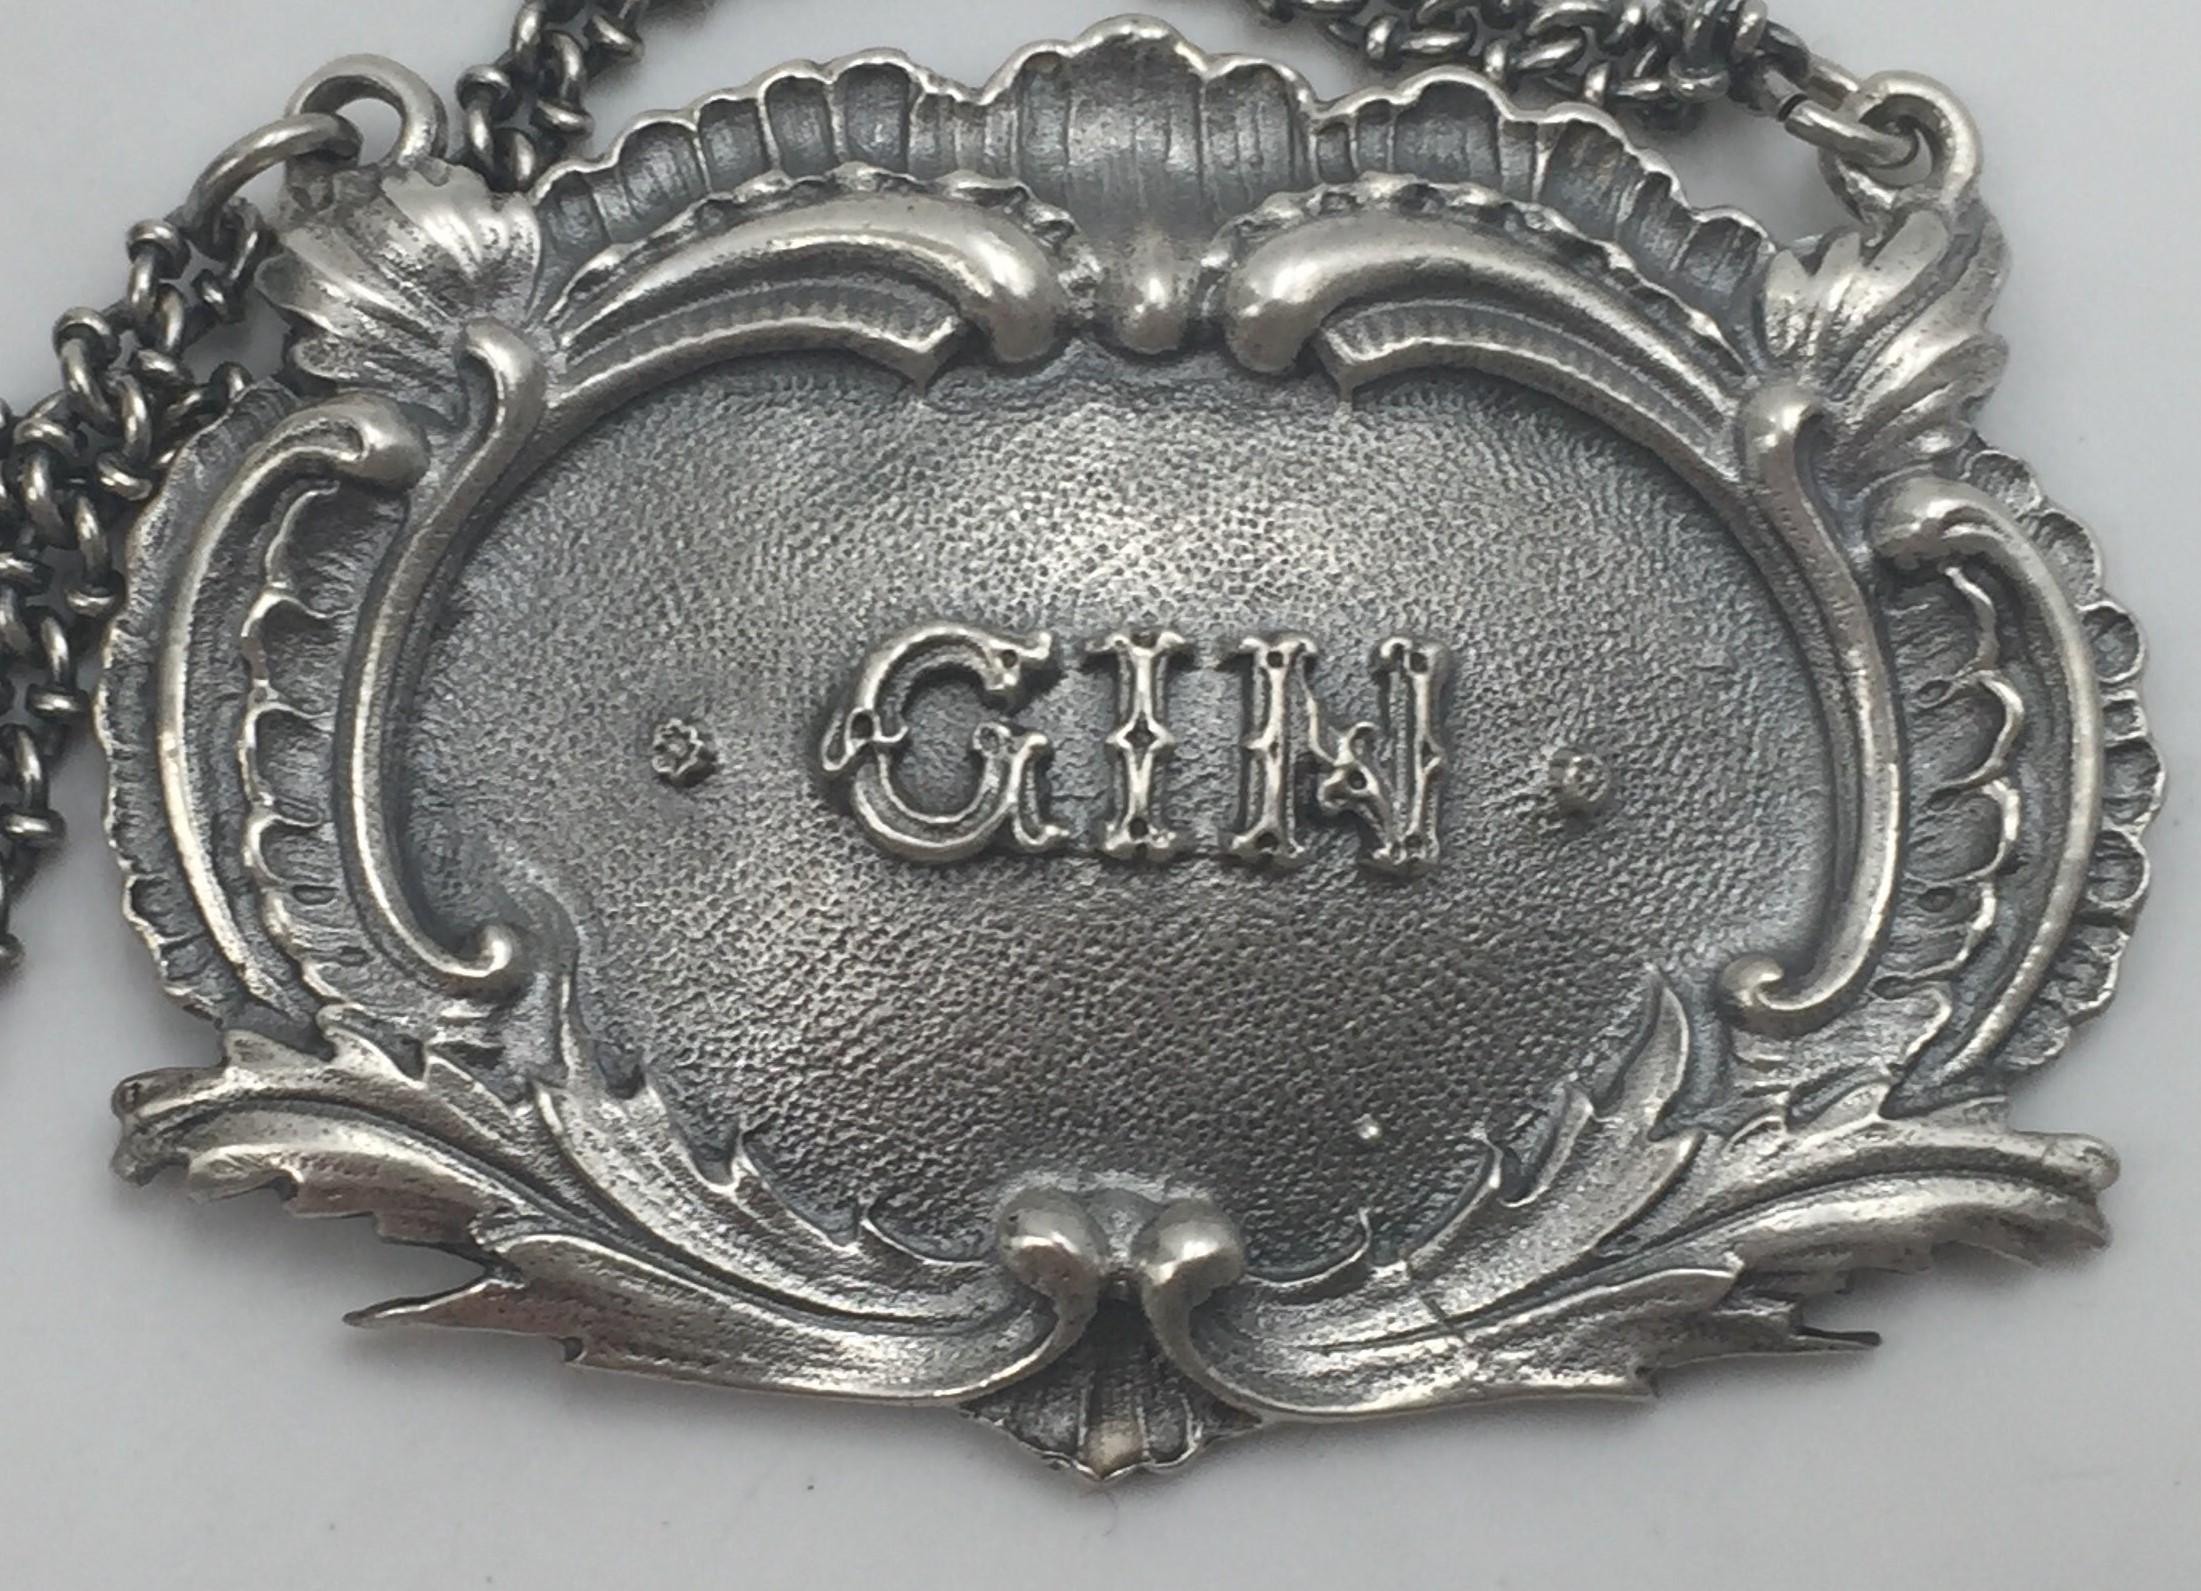 Buccellati Italian Sterling Silver Gin Ornate Claret Bar Jug Label In Good Condition For Sale In New York, NY